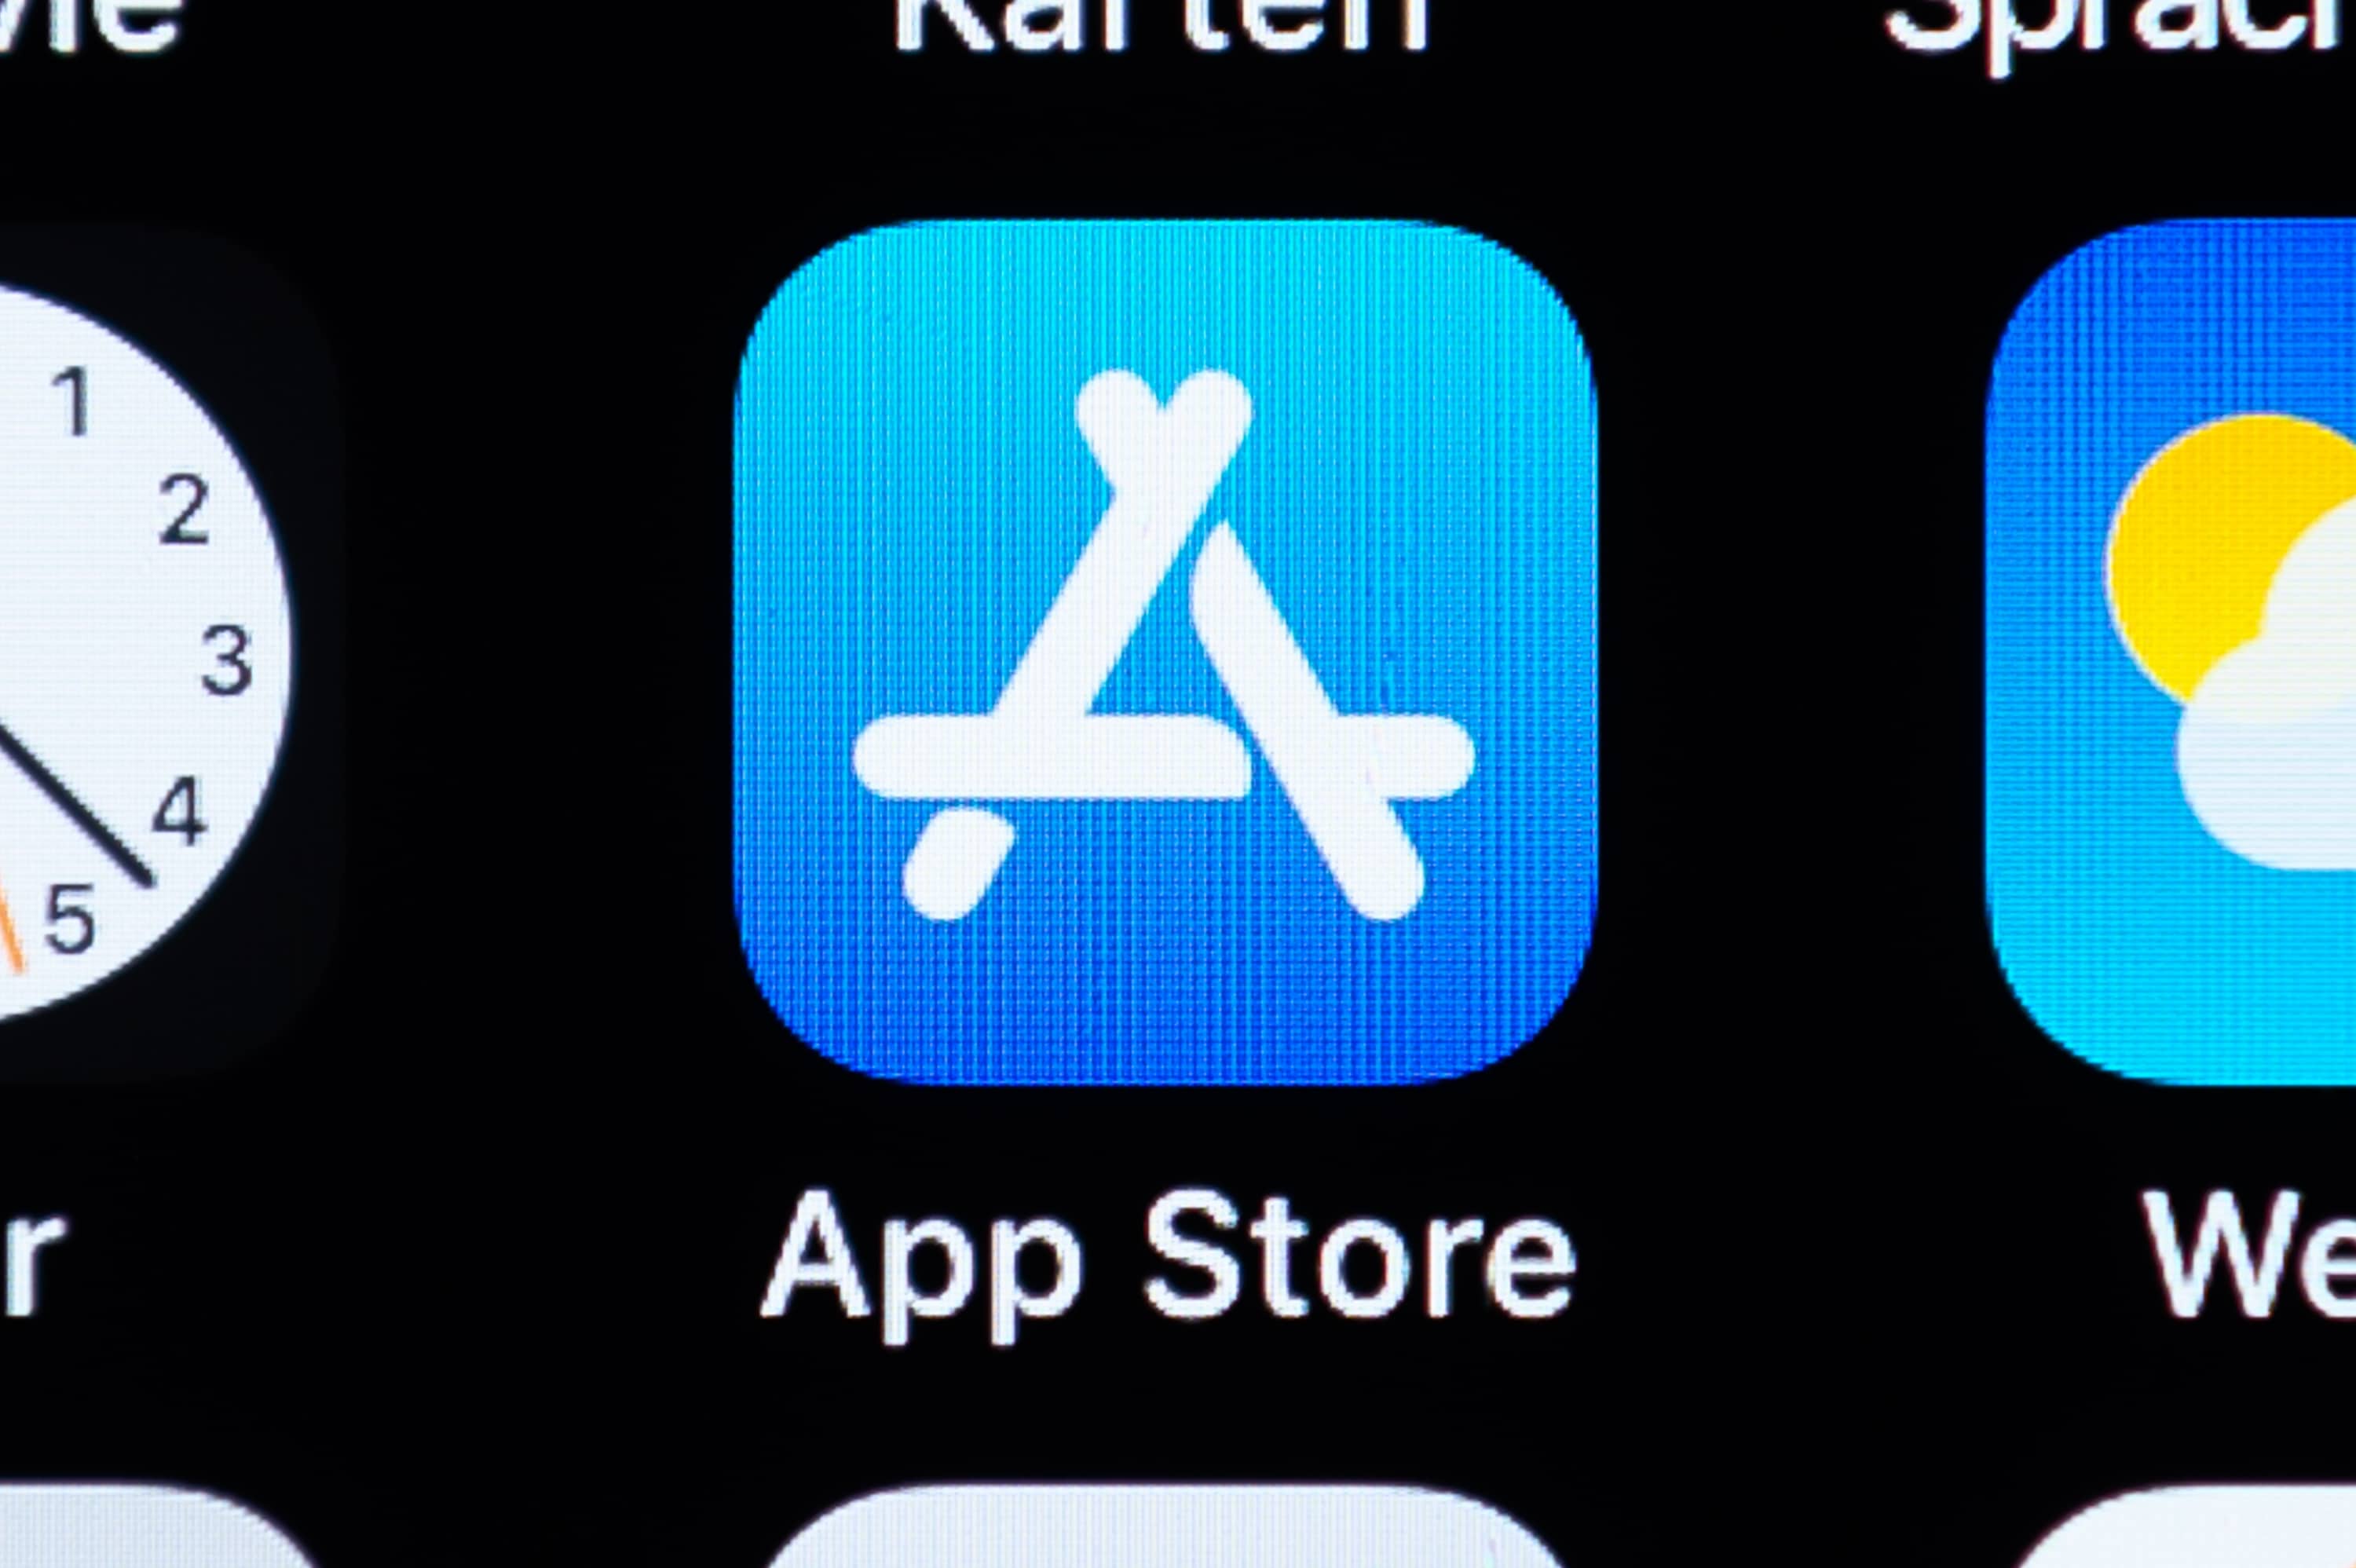 zoomed in app store Apple icon on the iPhone